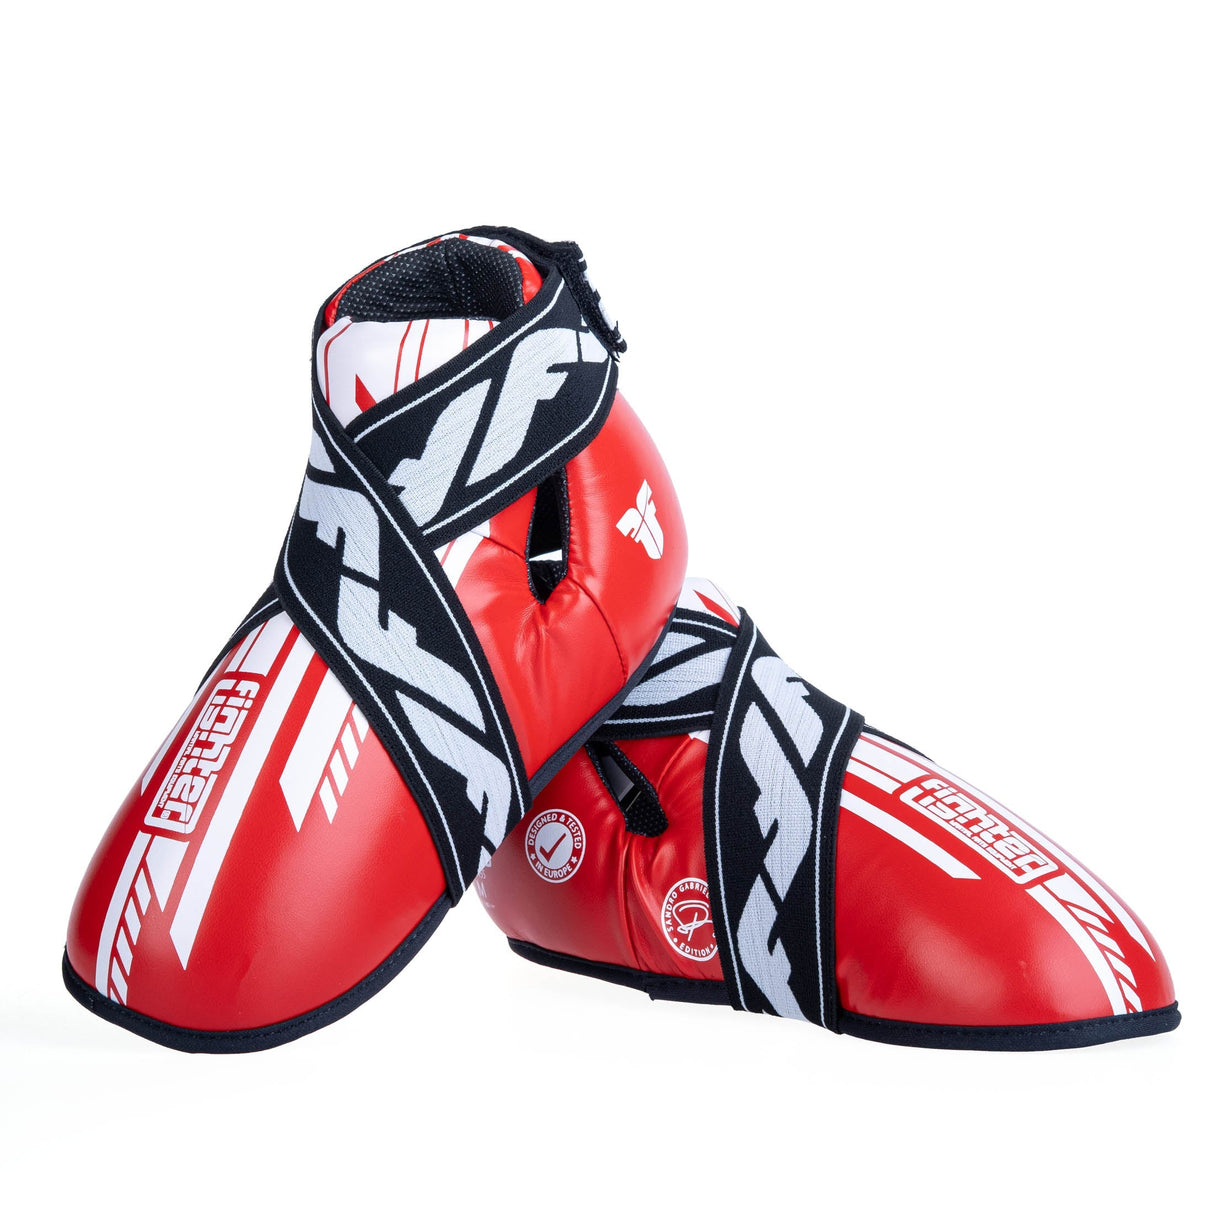 Fighter Foot Gear Quick - SGP Edition - rot